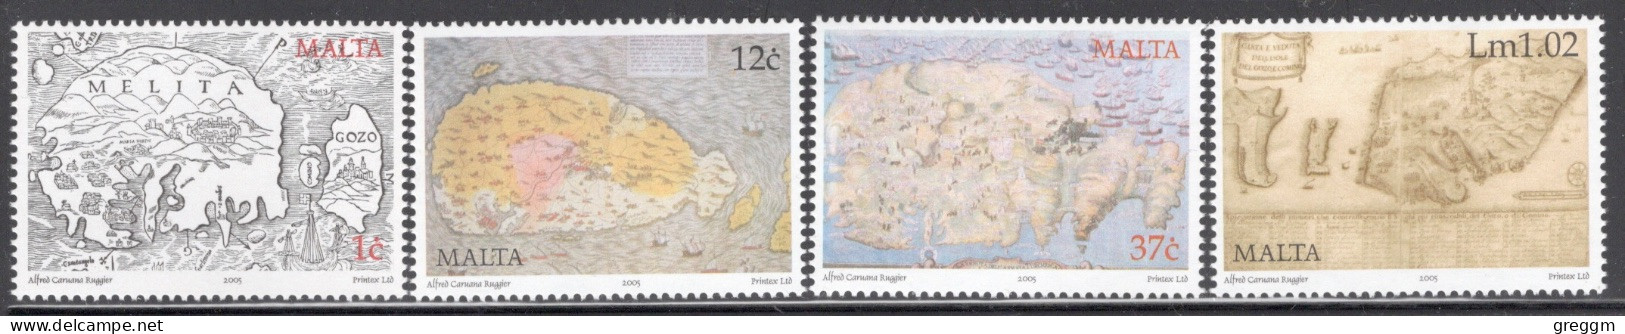 Malta 2005 Set Of Stamps To Celebrate Historical Maps Of Malta In Unmounted Mint - Malte